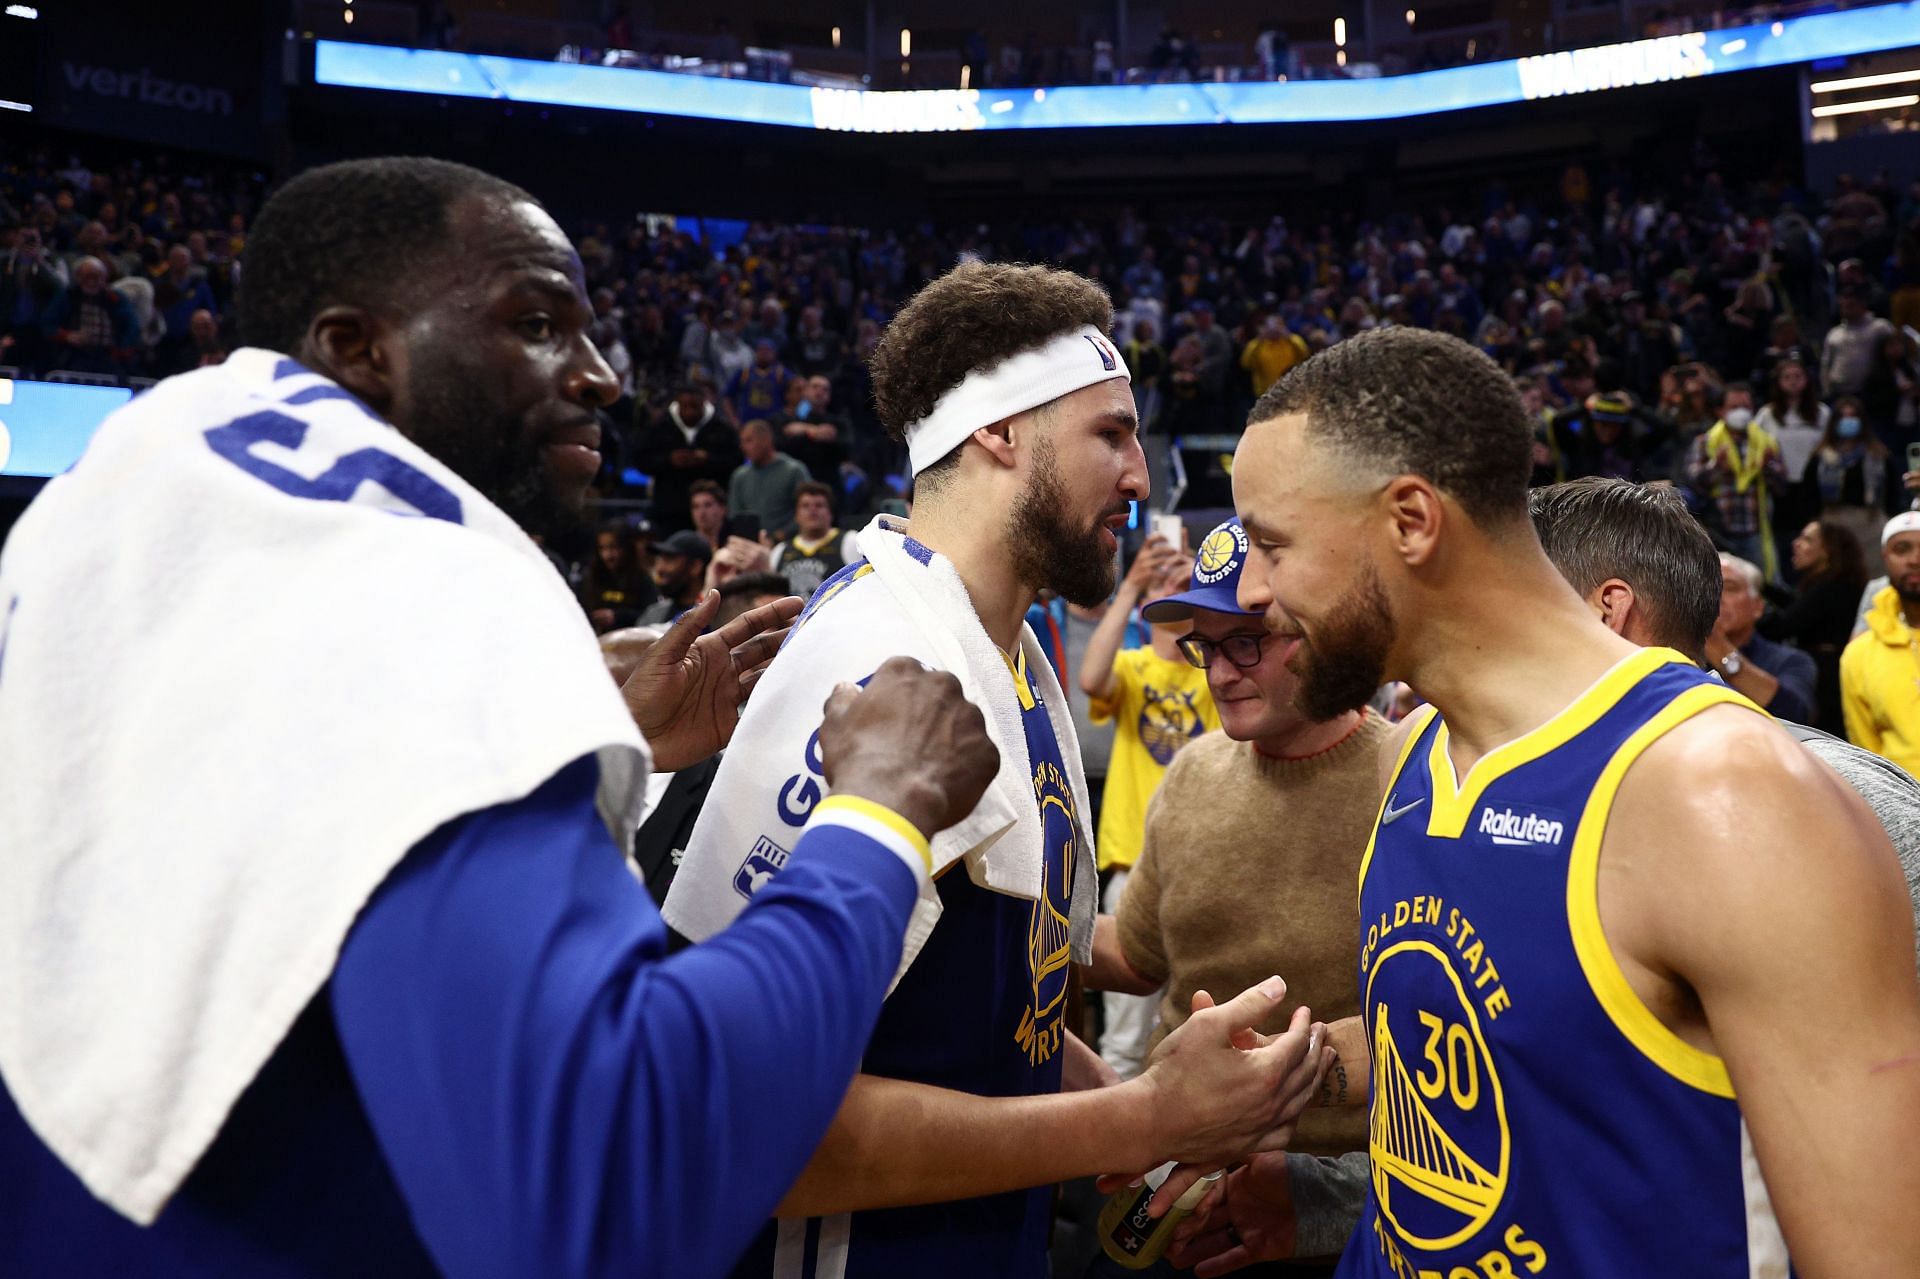 Steph Curry, Klay Thompson, and Draymond Green all played for the Golden State Warriors on Saturday